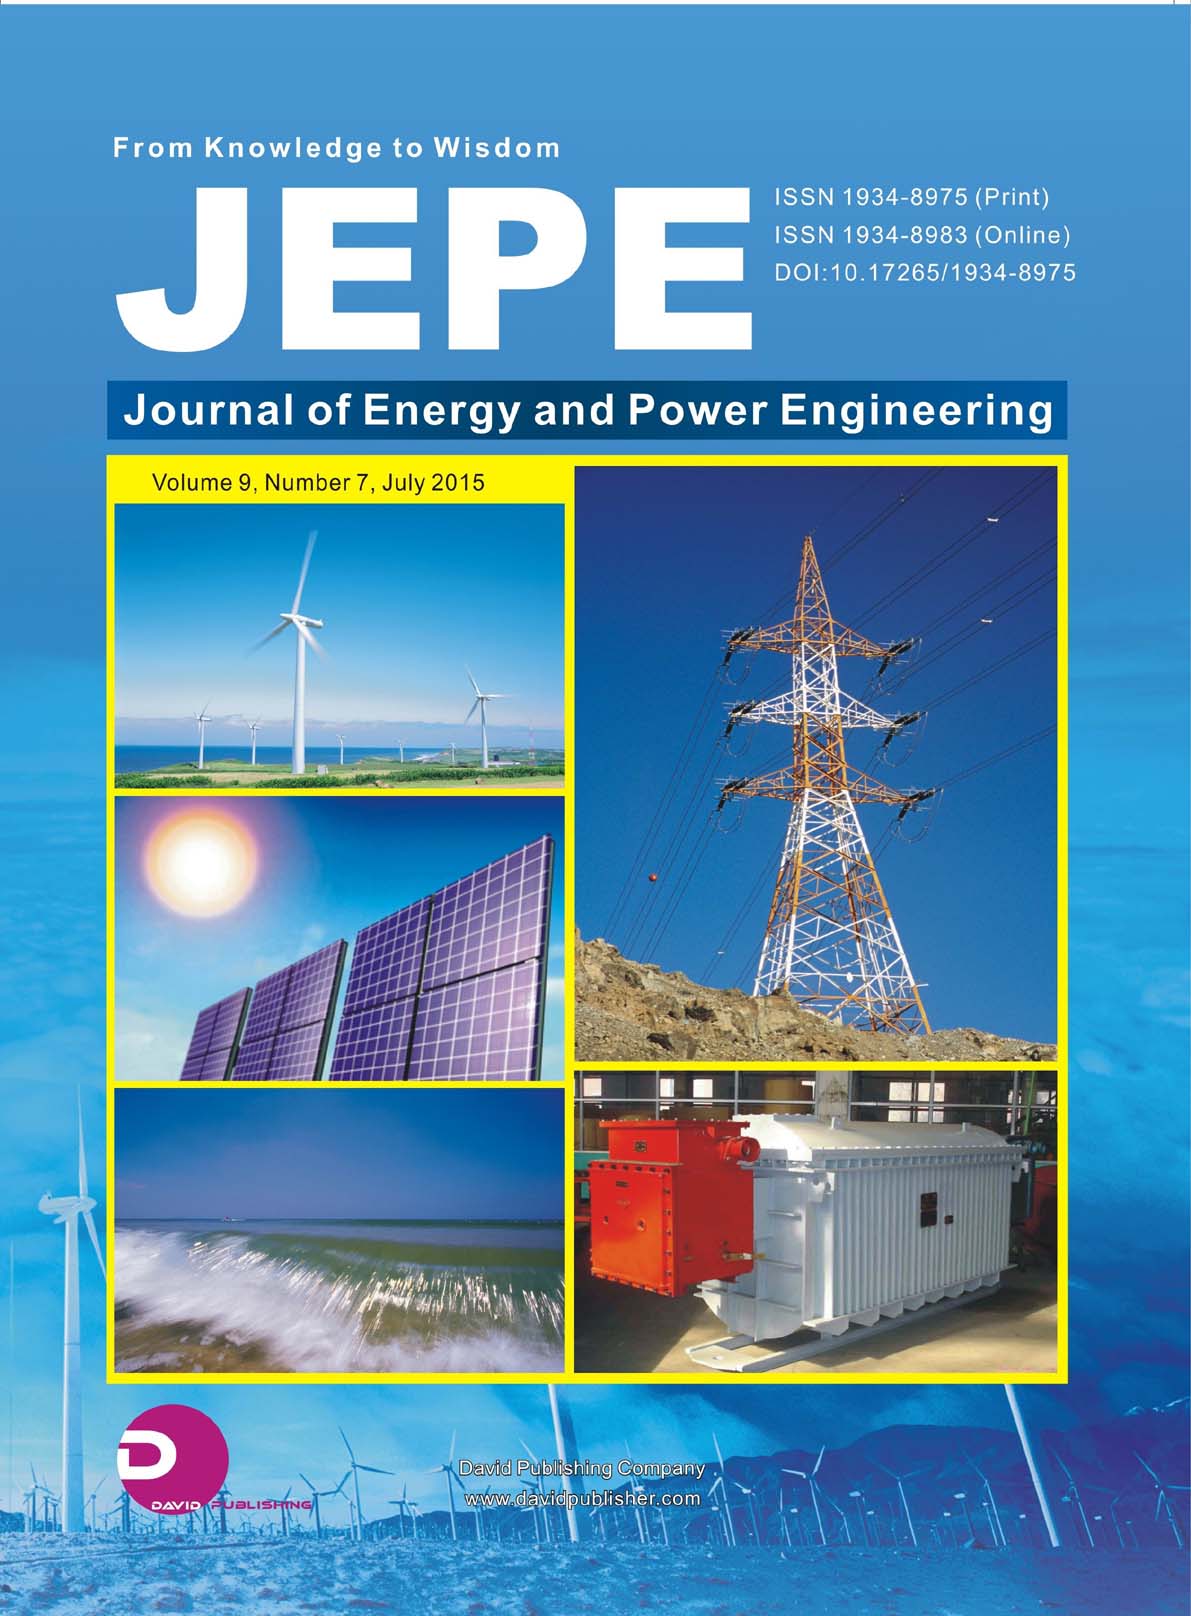 Journal of Energy and Power Engineering